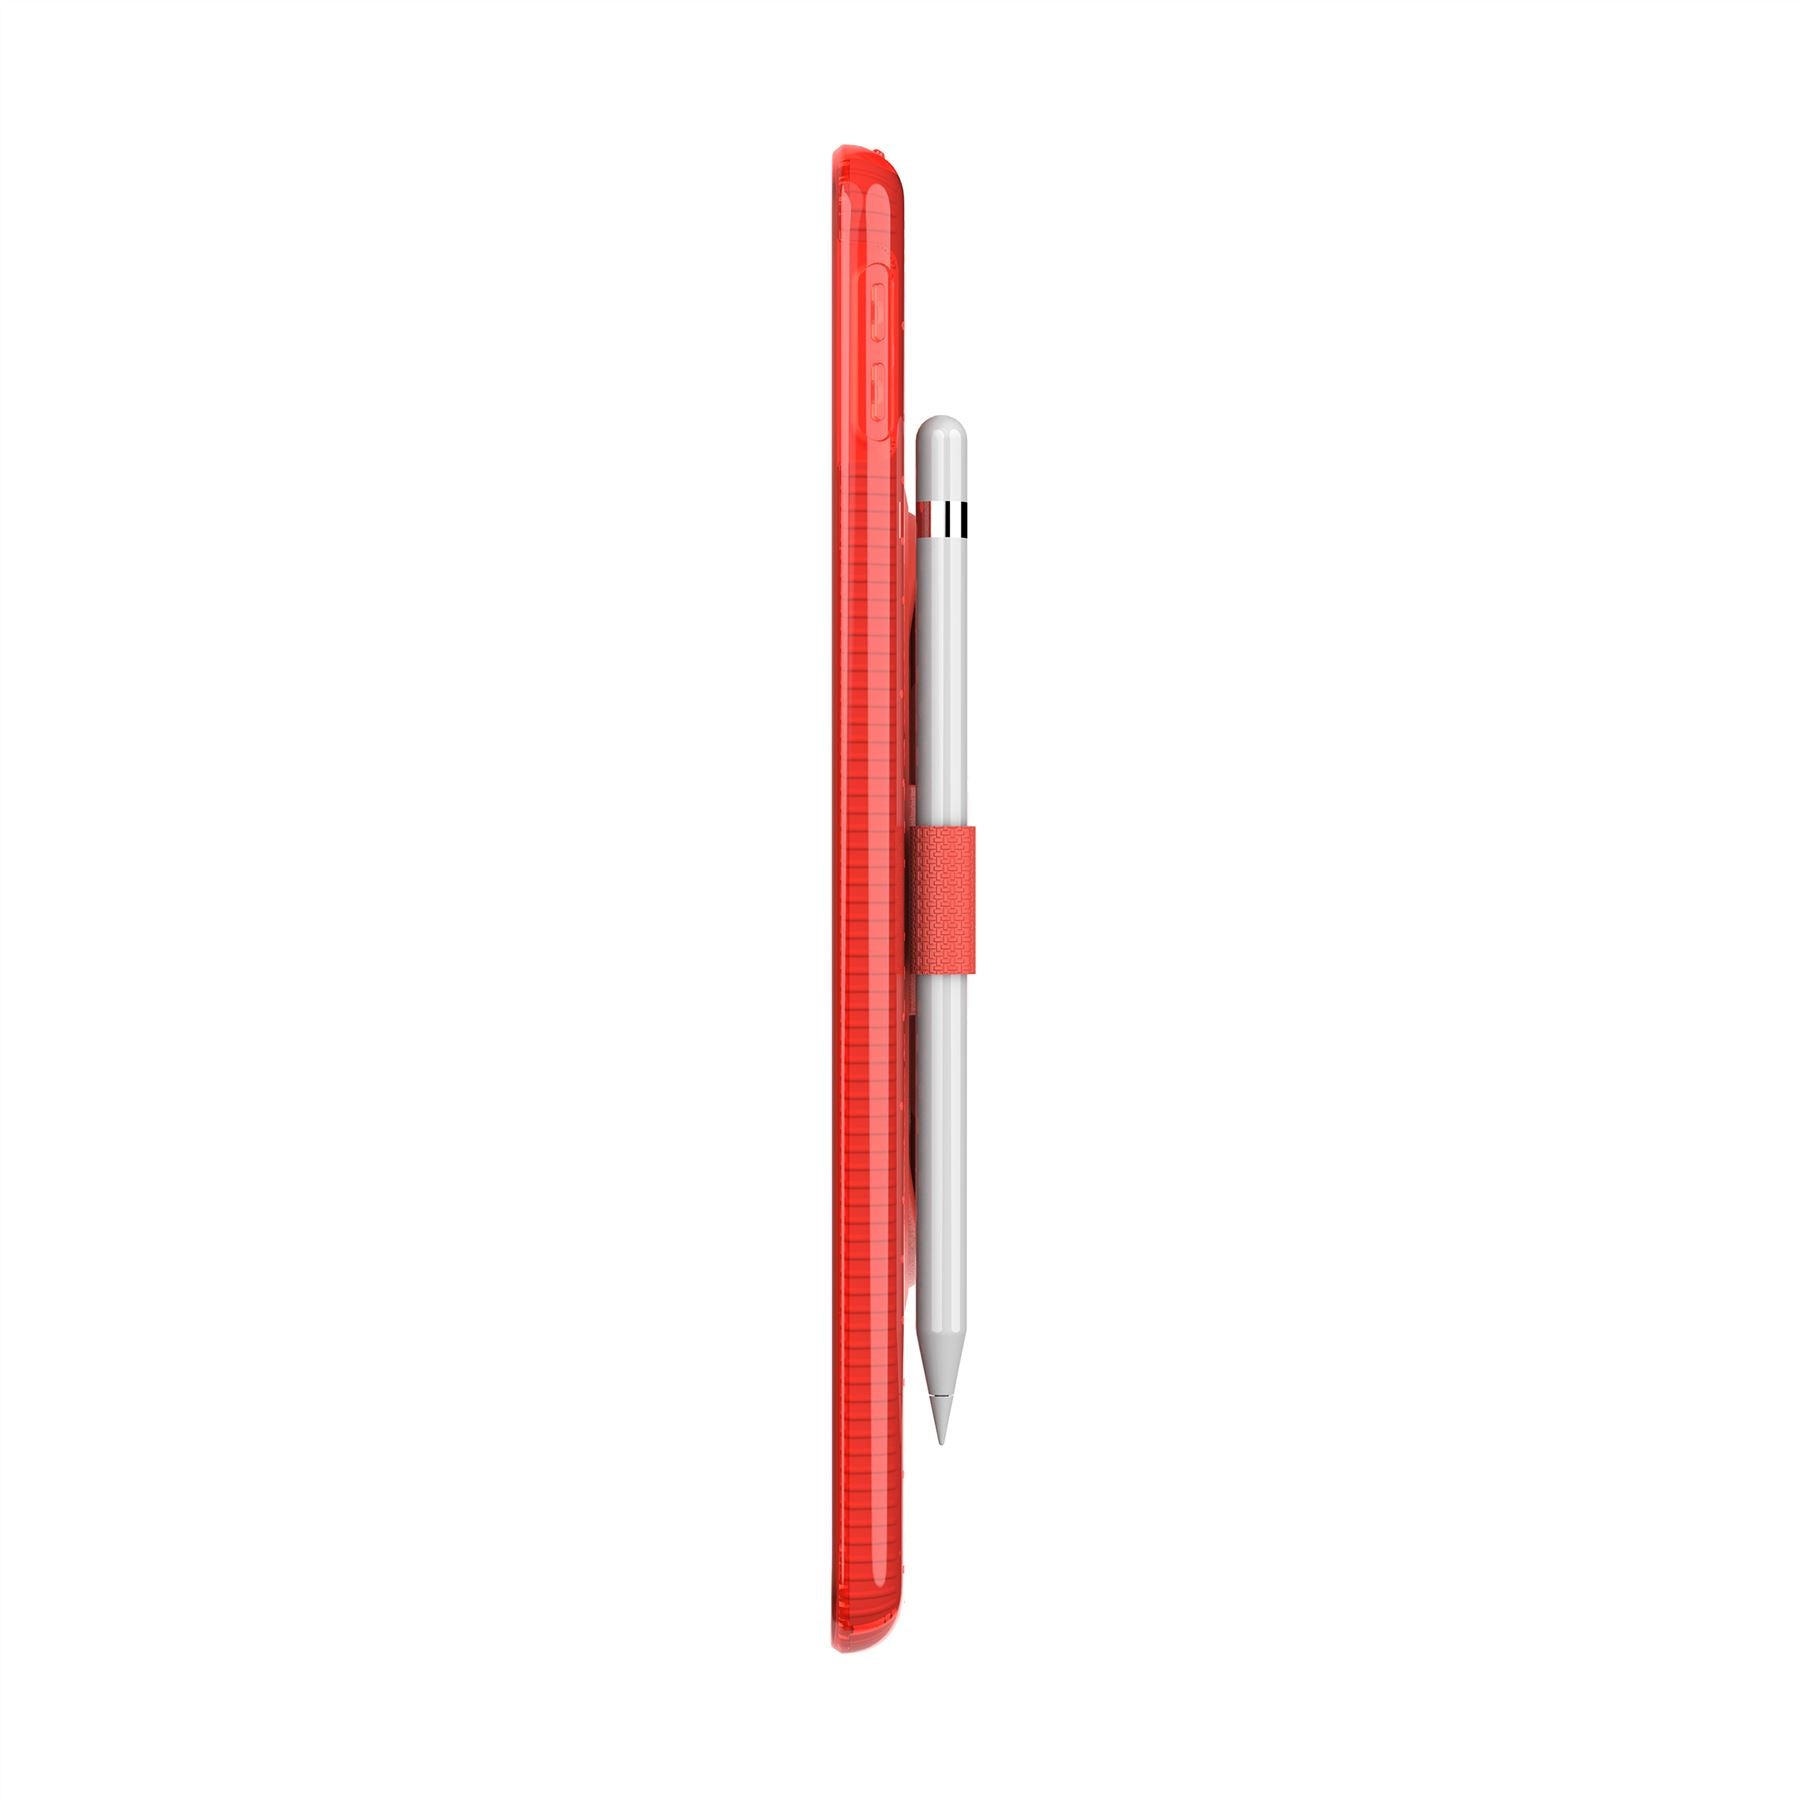 Evo Play2 with Pencil Holder - Apple iPad 7th/8th Gen Case - Red